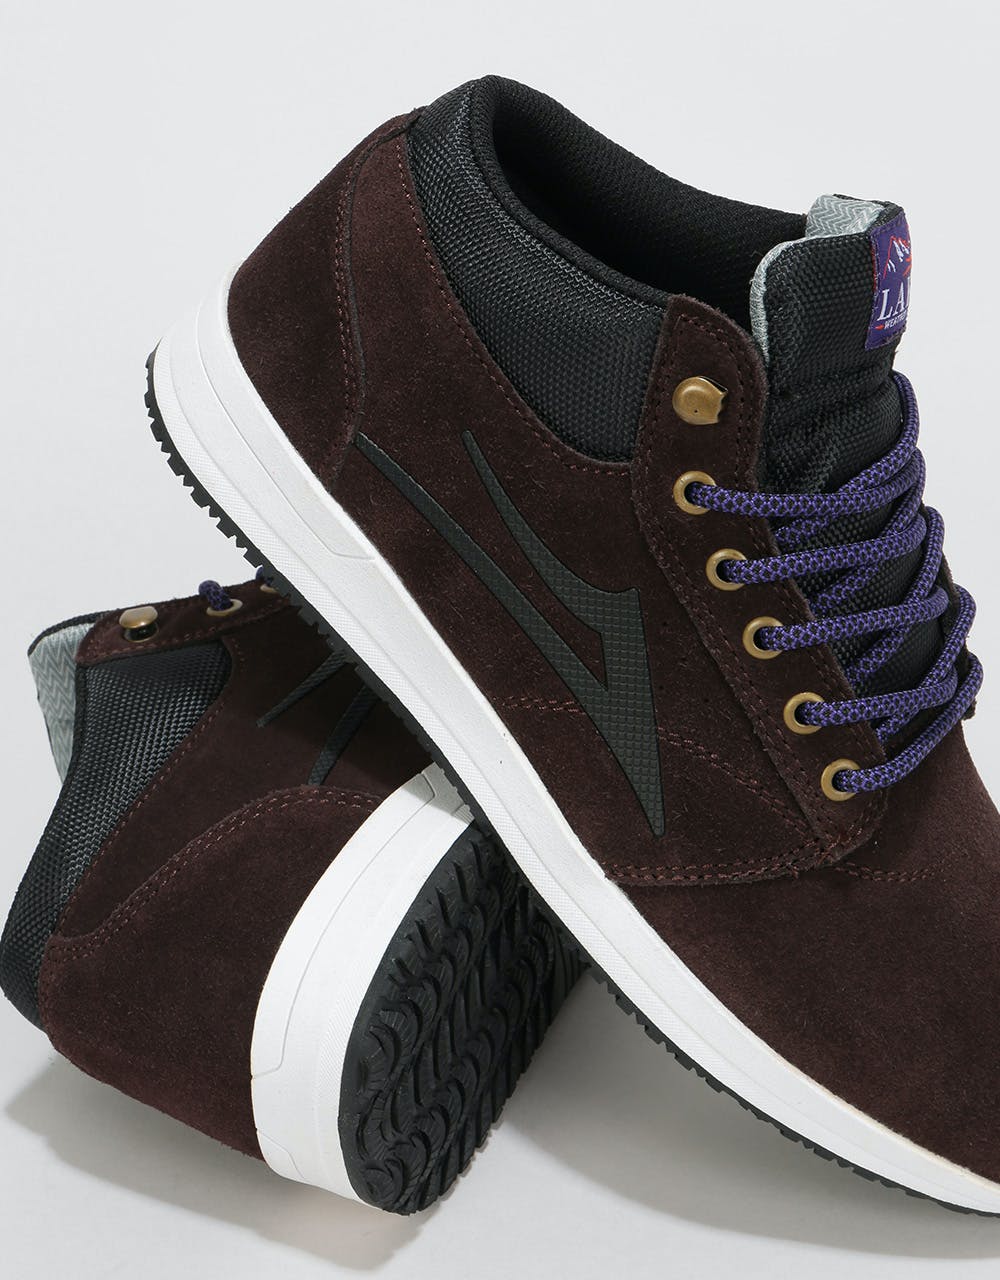 Lakai Griffin Mid Skate Shoes - Chocolate Suede